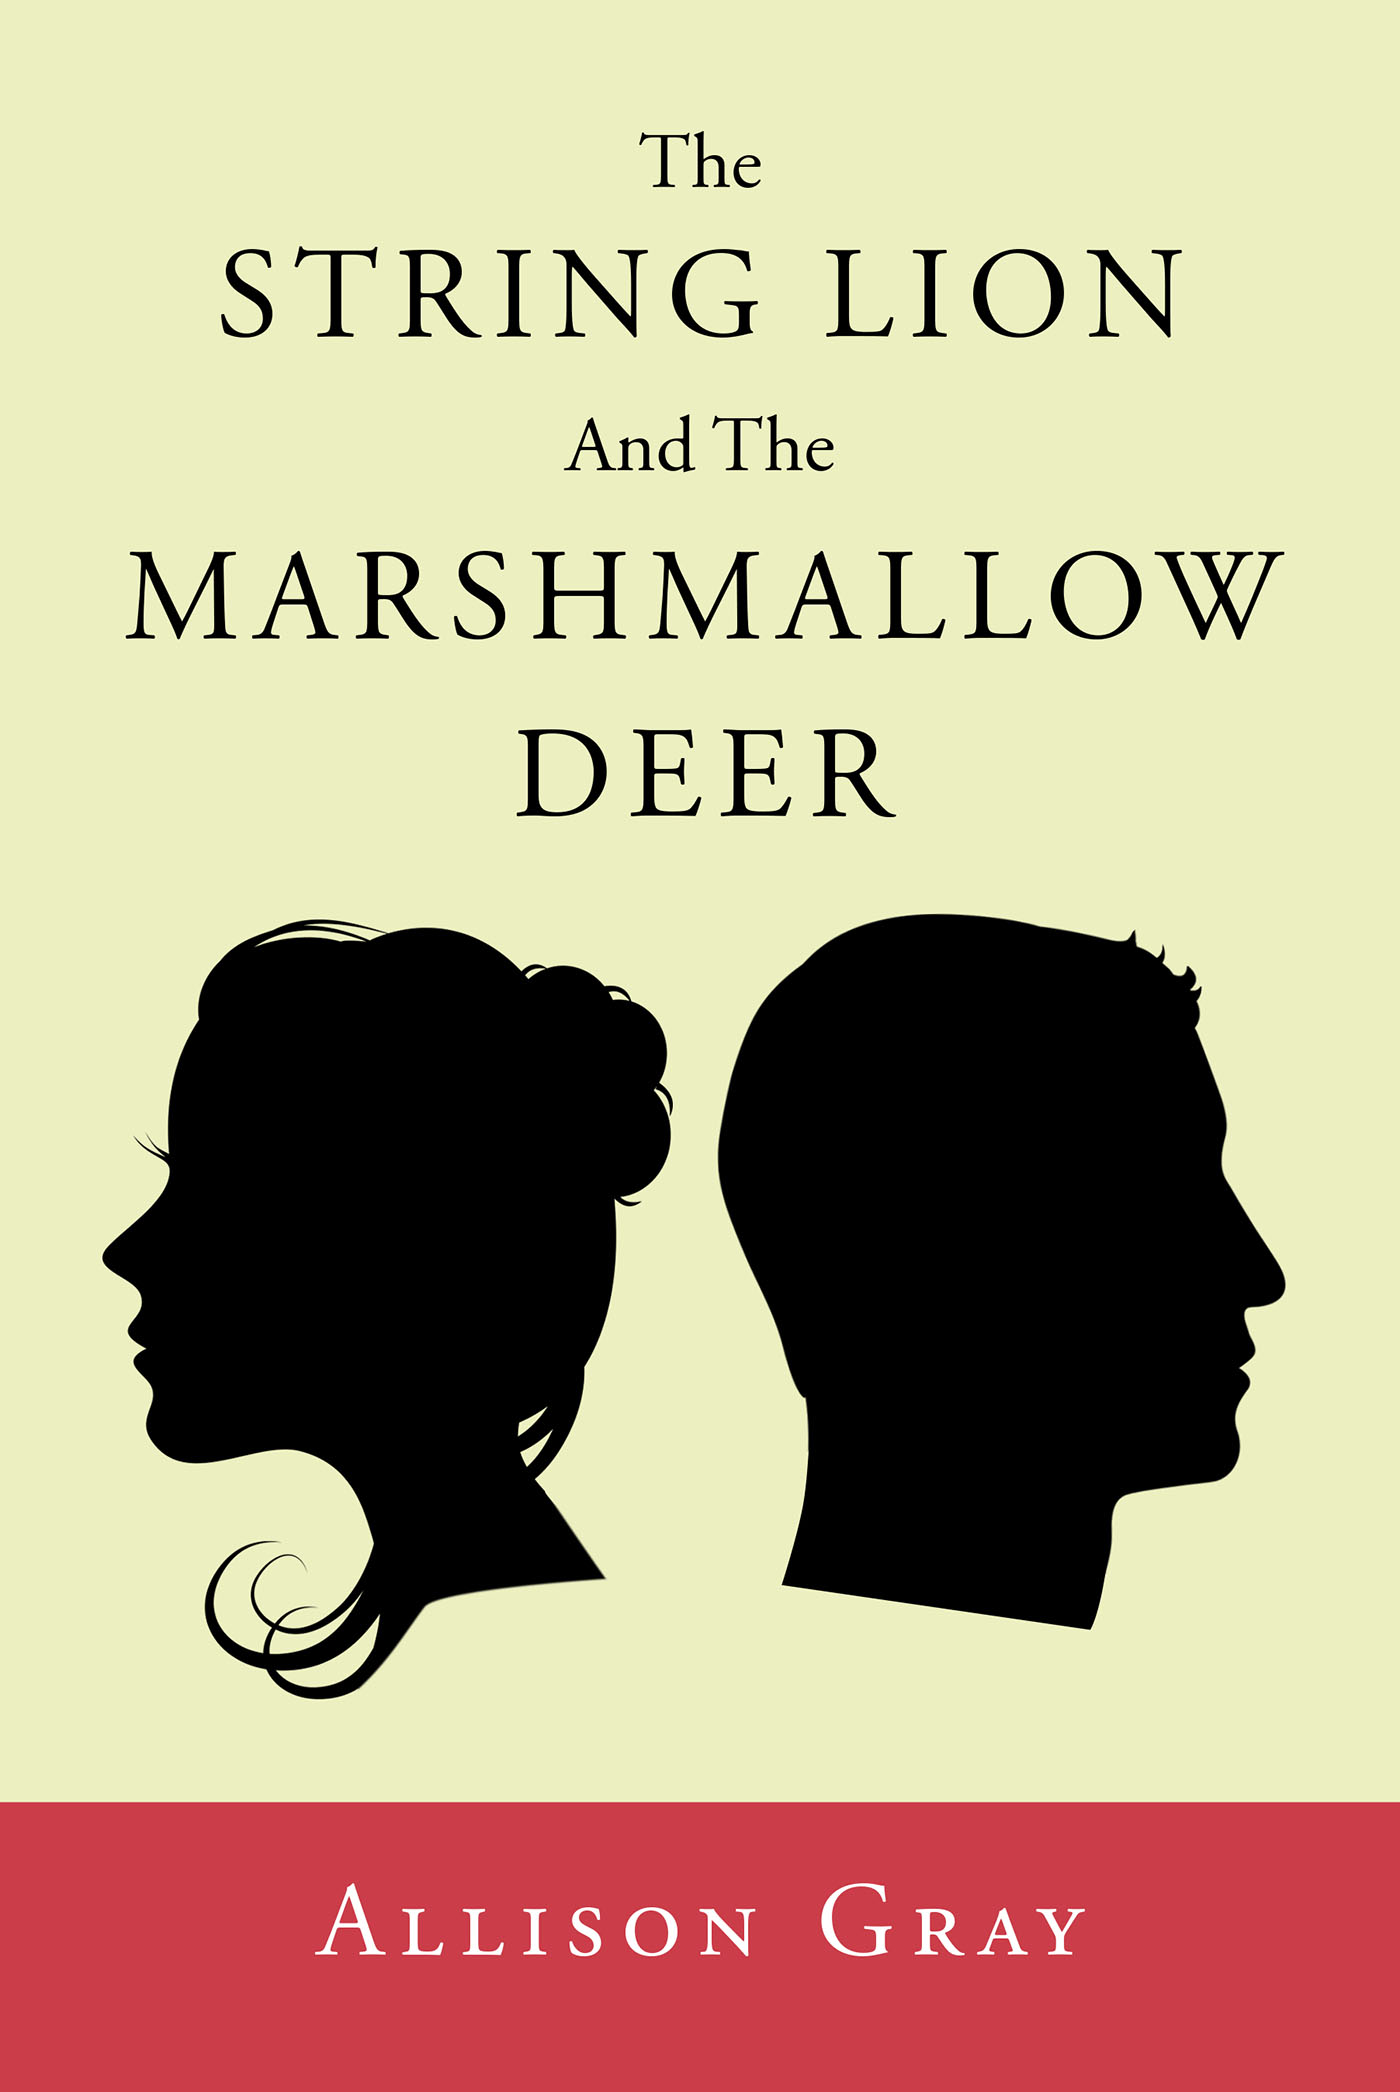 Author Allison Gray’s New Book, "The String Lion and the Marshmallow Deer," is the Love Affair That Turns Traditional Conventions on Their Head